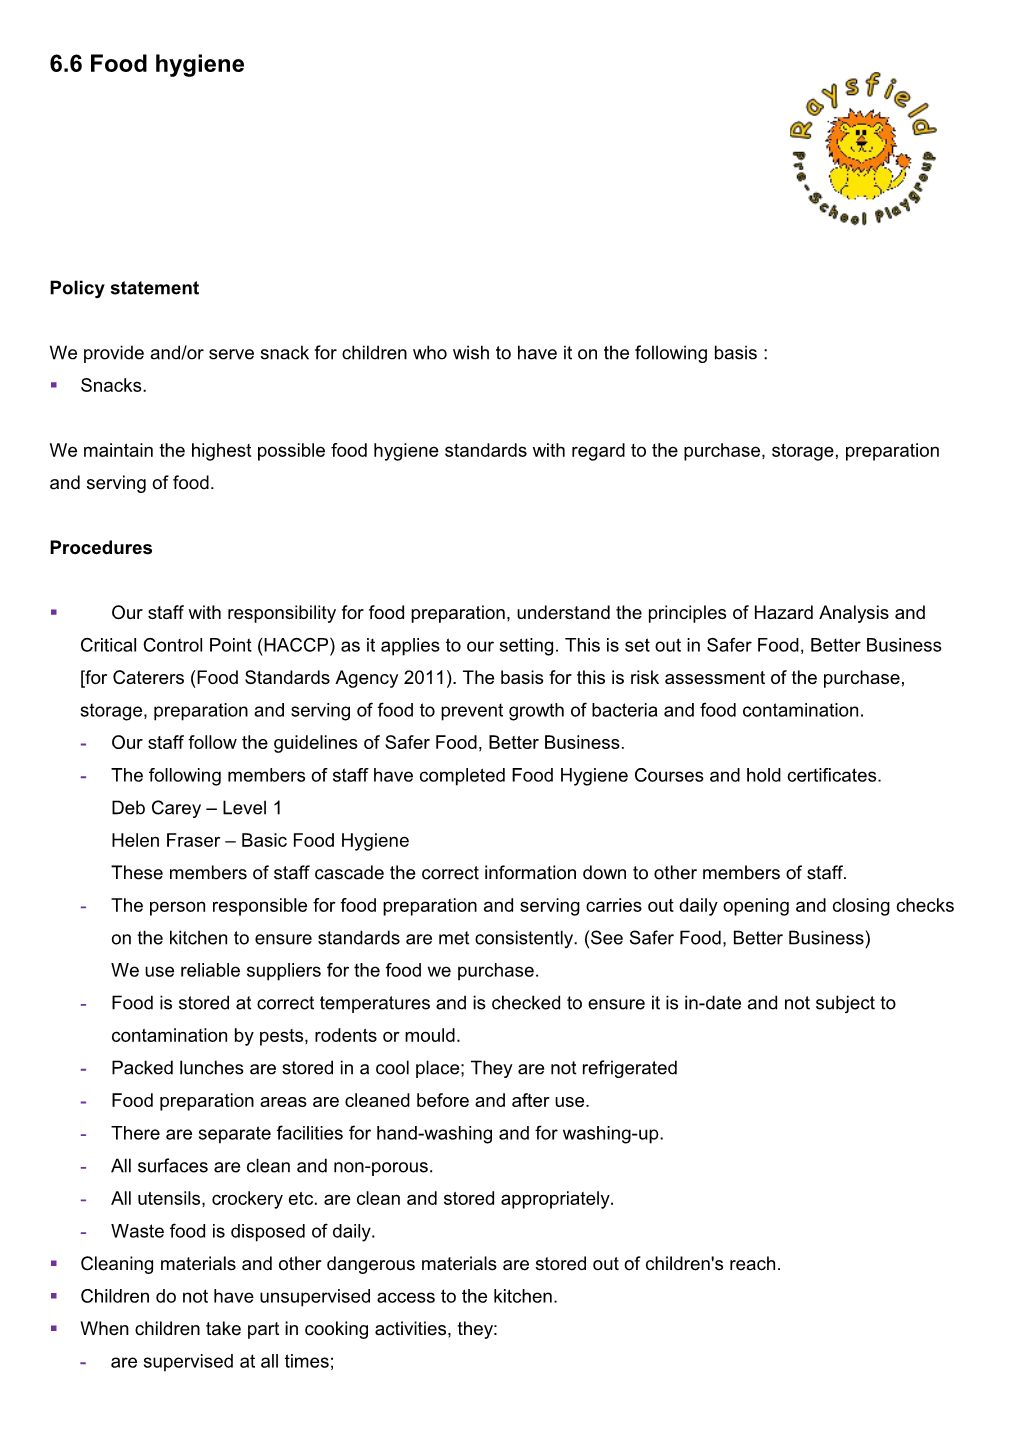 Policy Statement s1